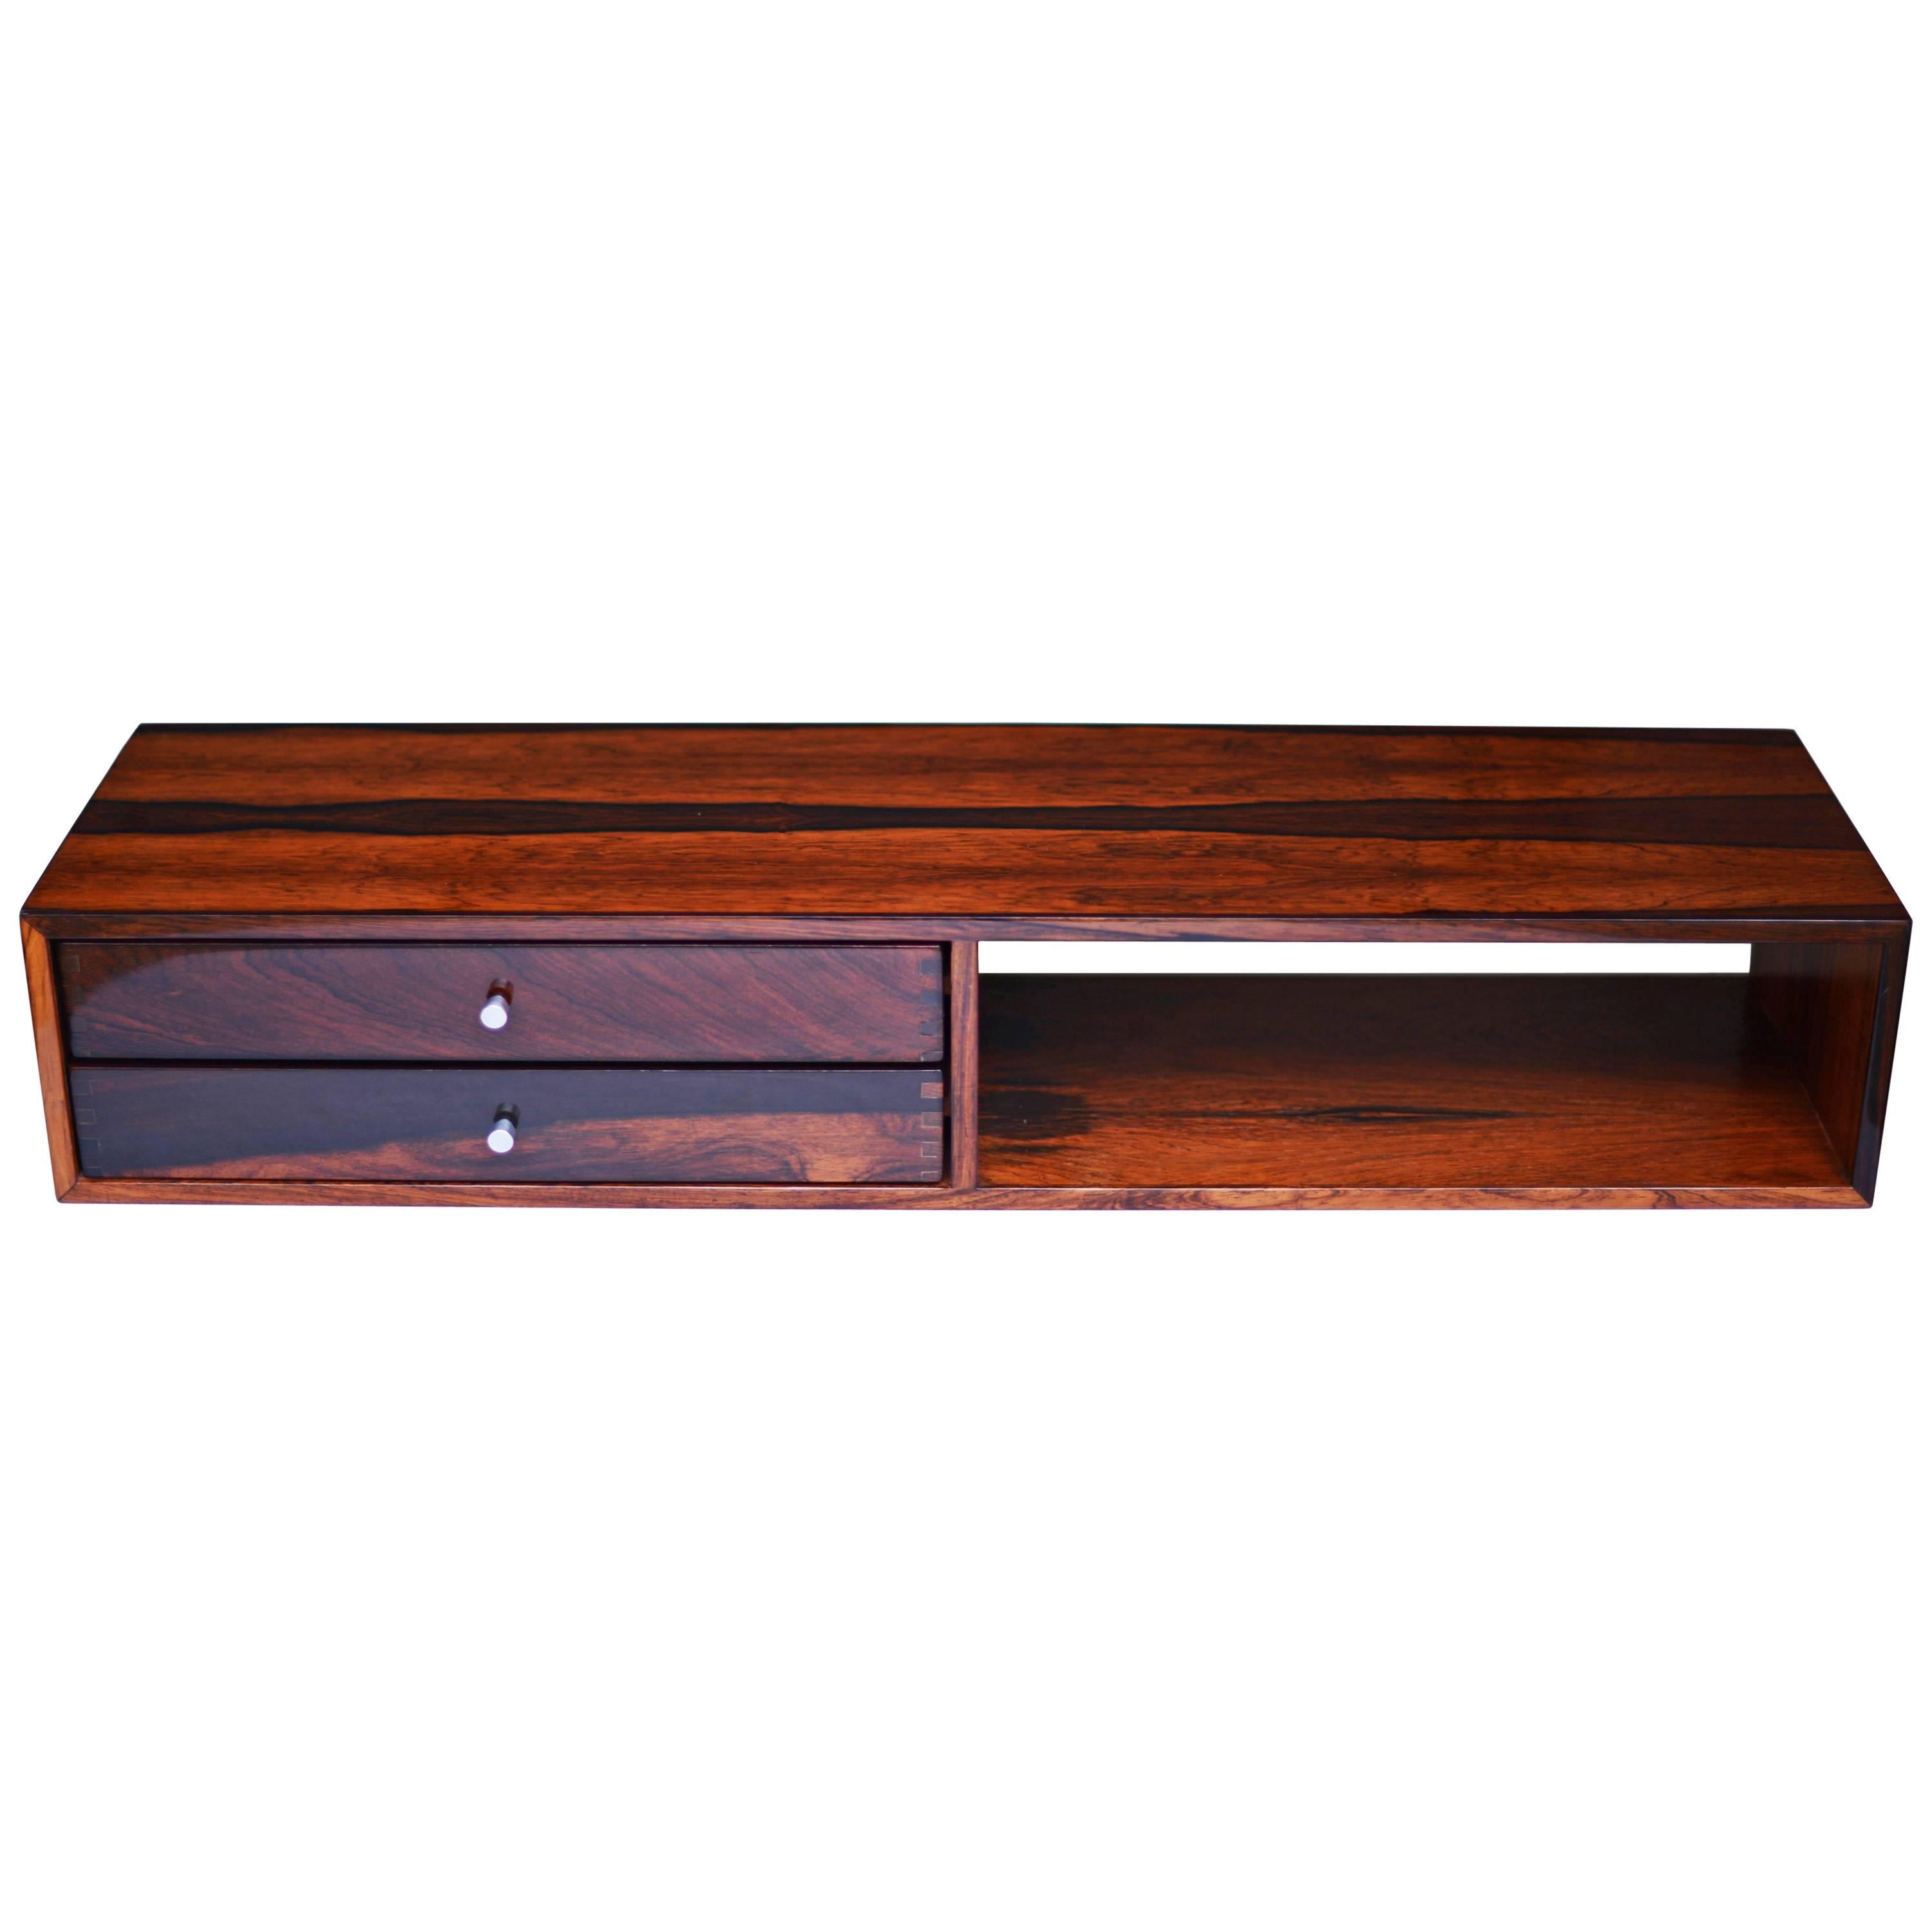 Kai Kristiansen Rare Rosewood Wall Floating Table, High Gloss Polished by Hand For Sale